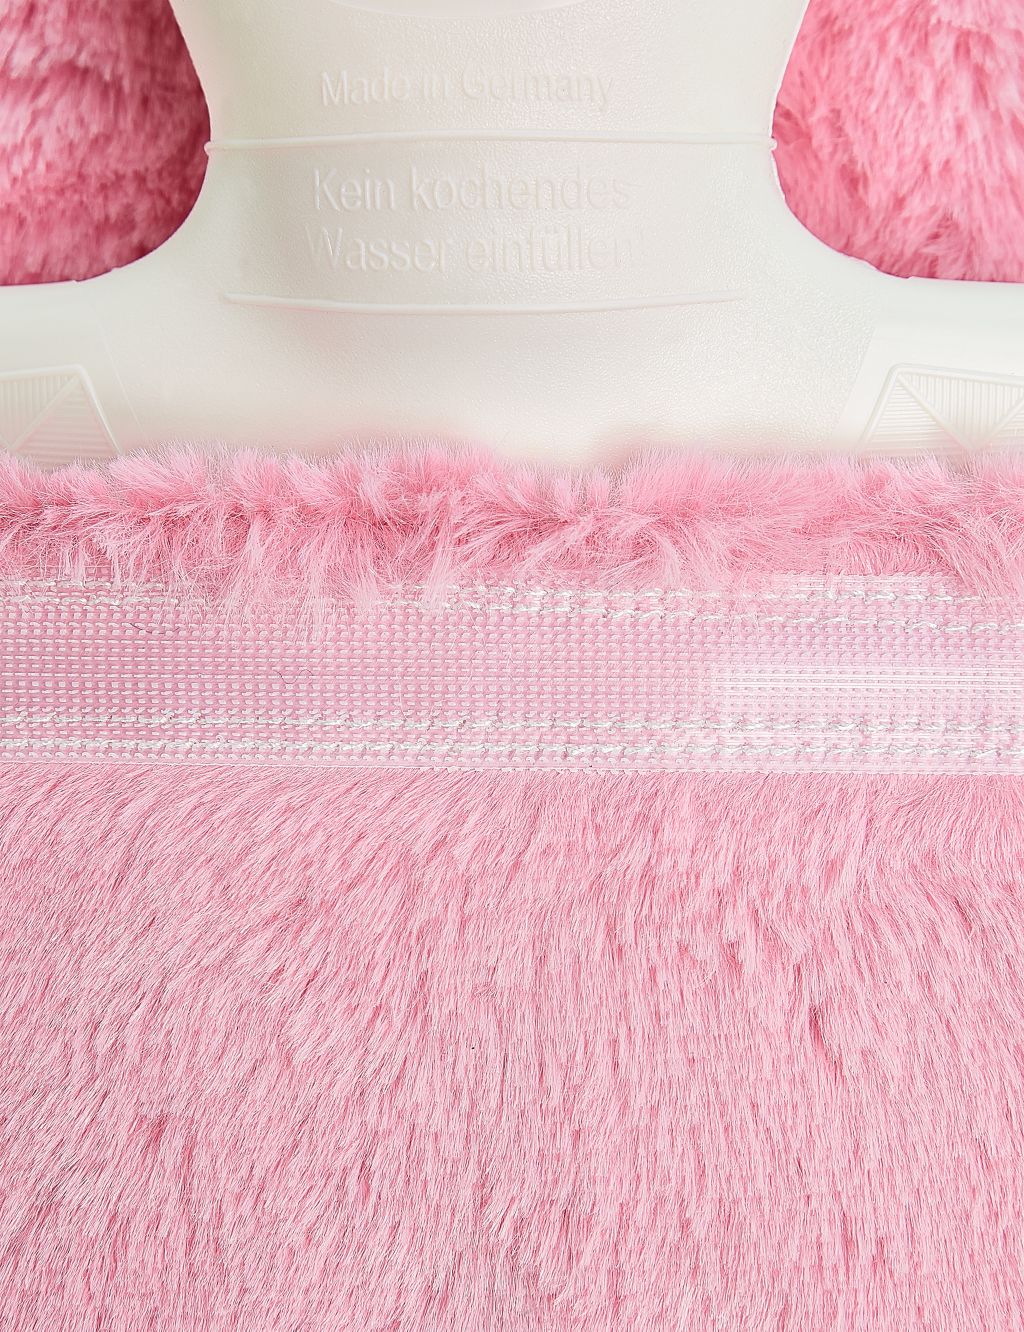 Percy Pig™ Hot Water Bottle image 3